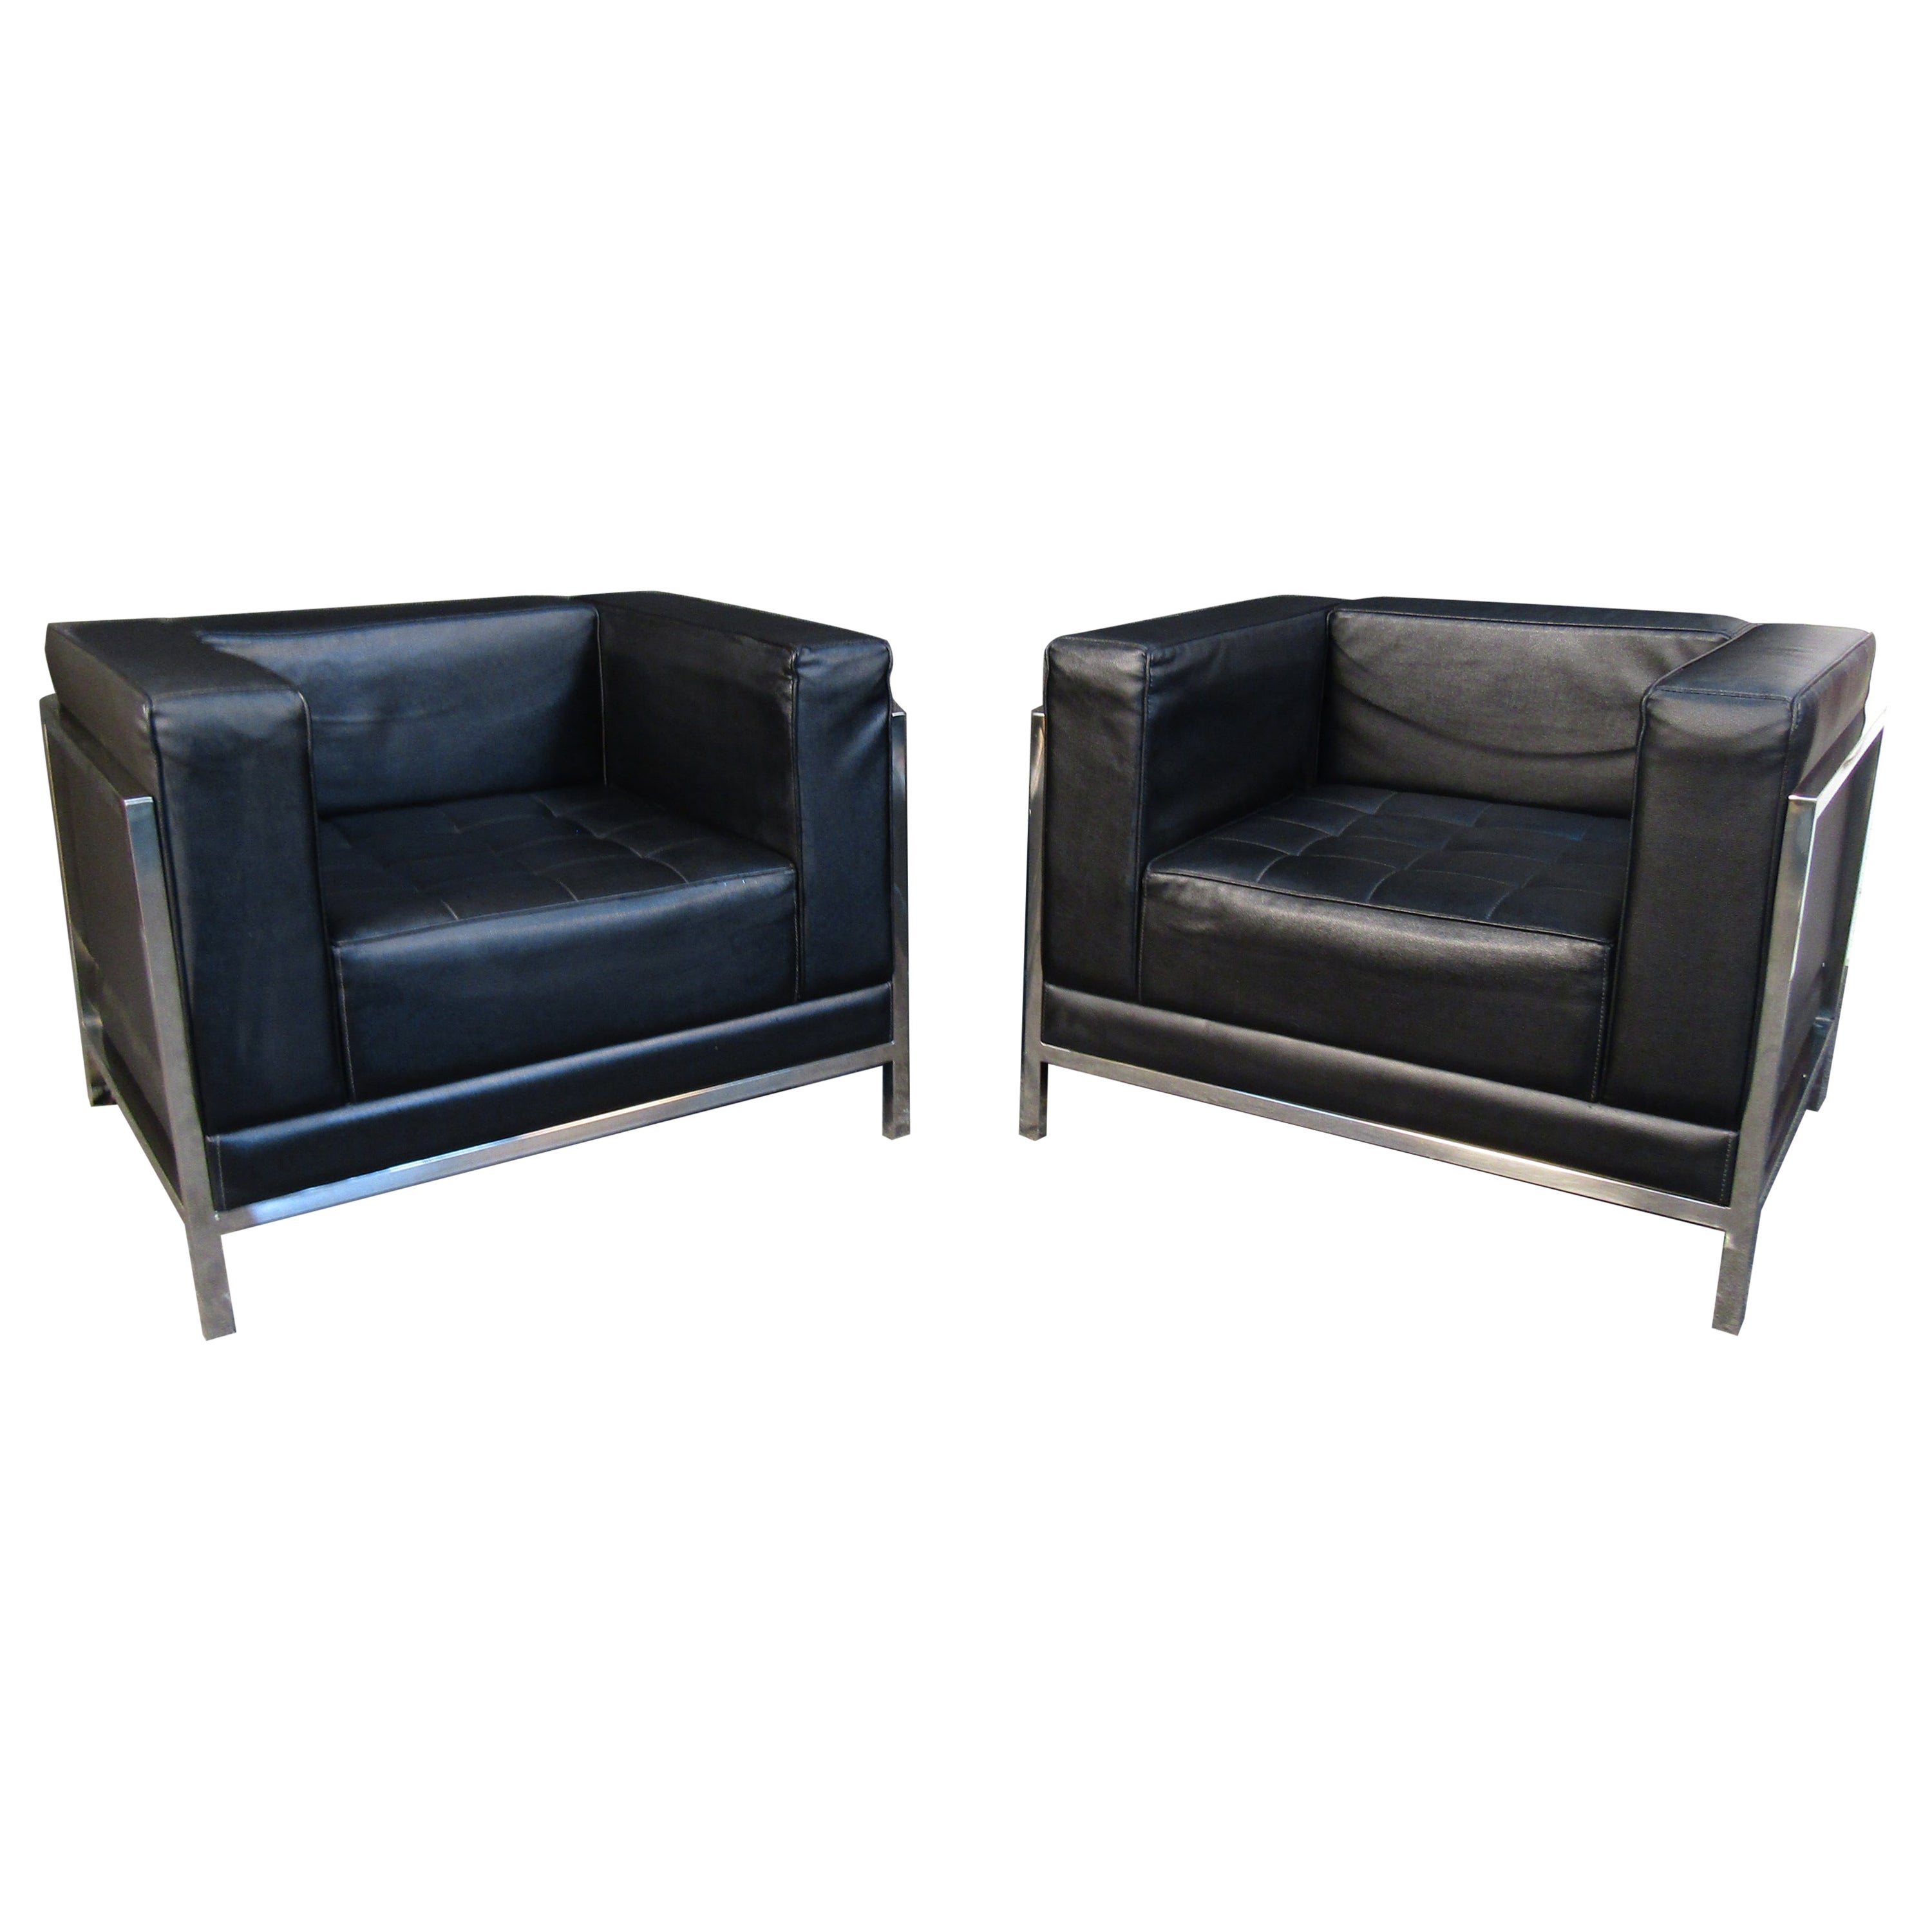 Mid-Century Modern Pair of Club Chairs in Black Leather and Chrome